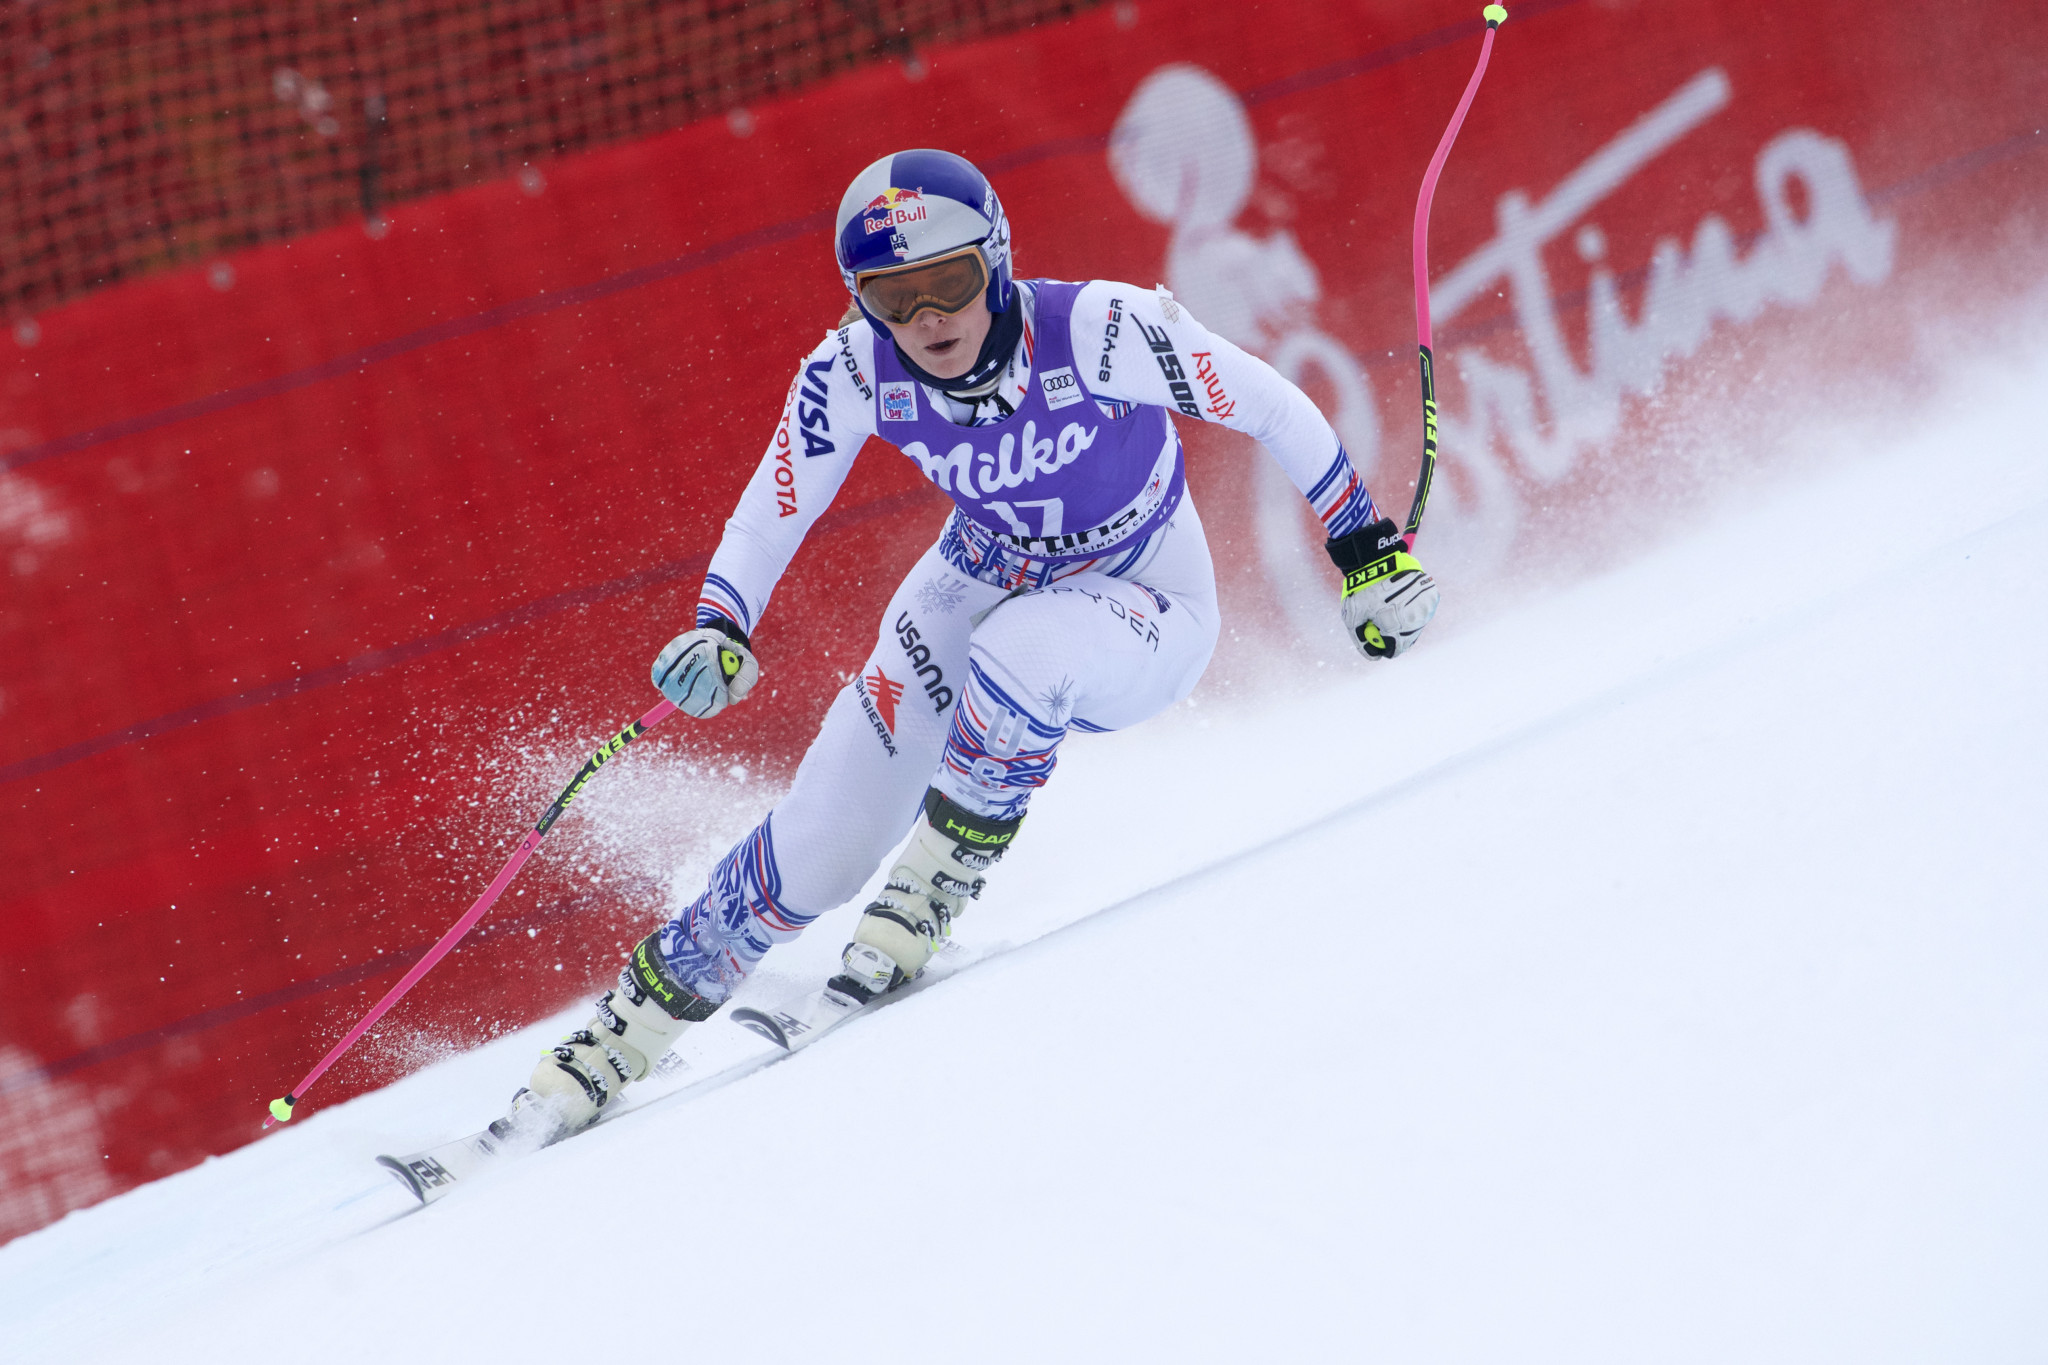 The United States' Lindsey Vonn took part in training today in Cortina d'Ampezzo ©Getty Images